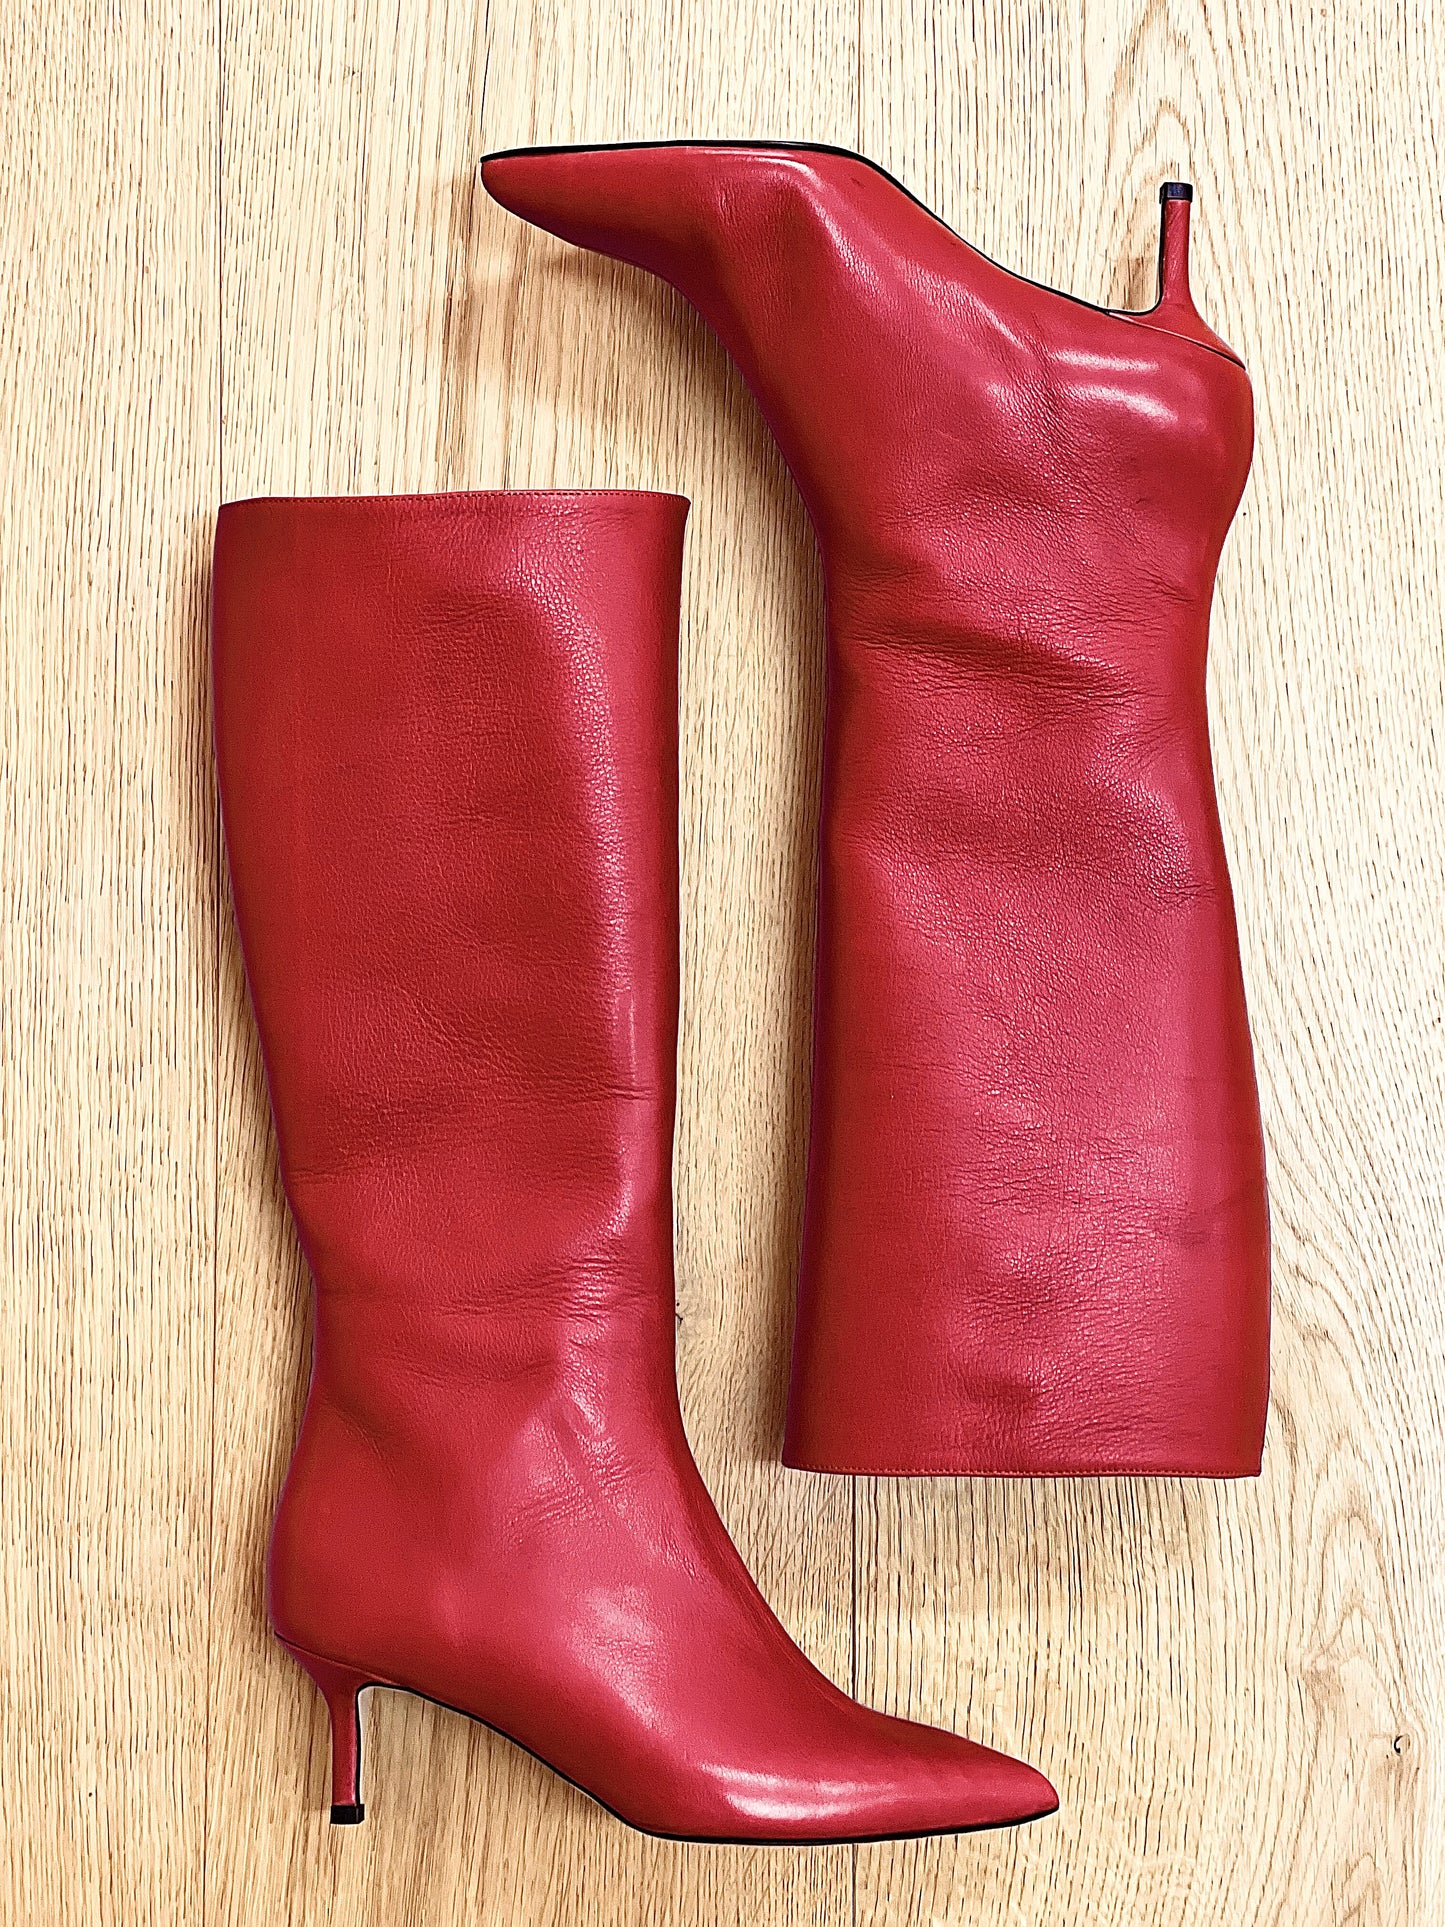 MELISSA LEATHER RED